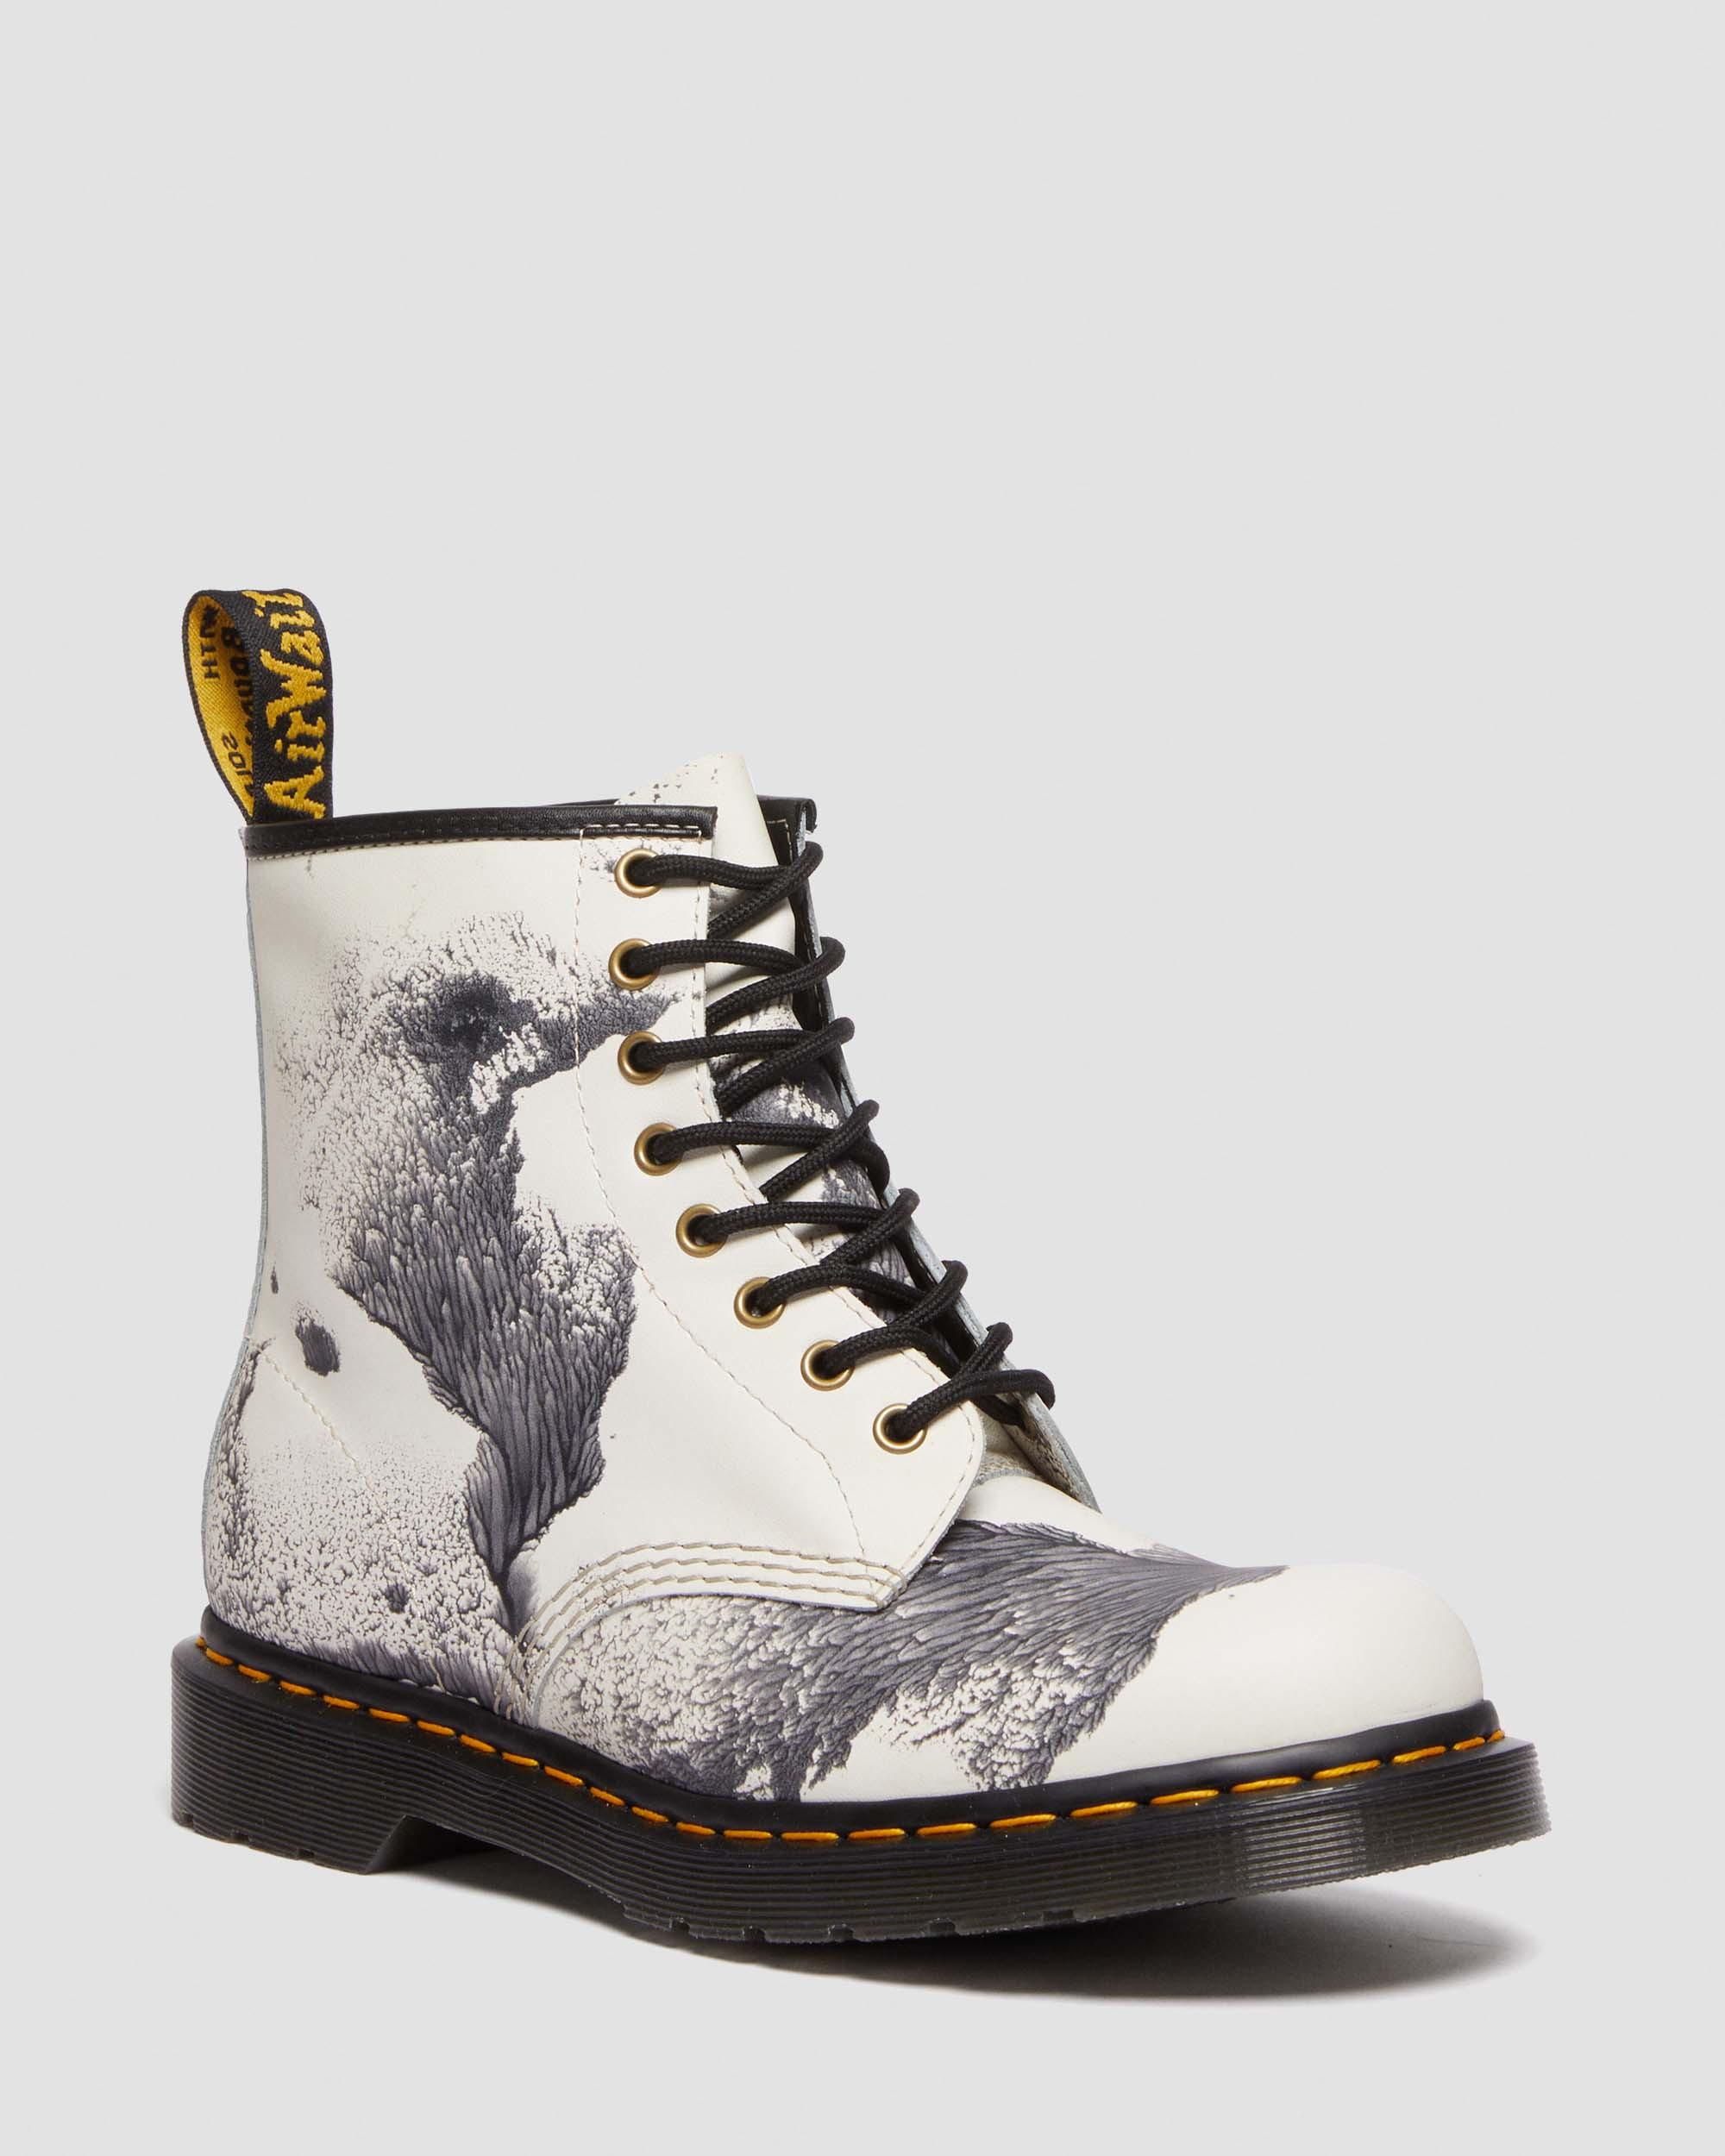 Dr. Martens' 1460 Tate Decal Boot In Decalcomania, Women's At Urban Outfitters